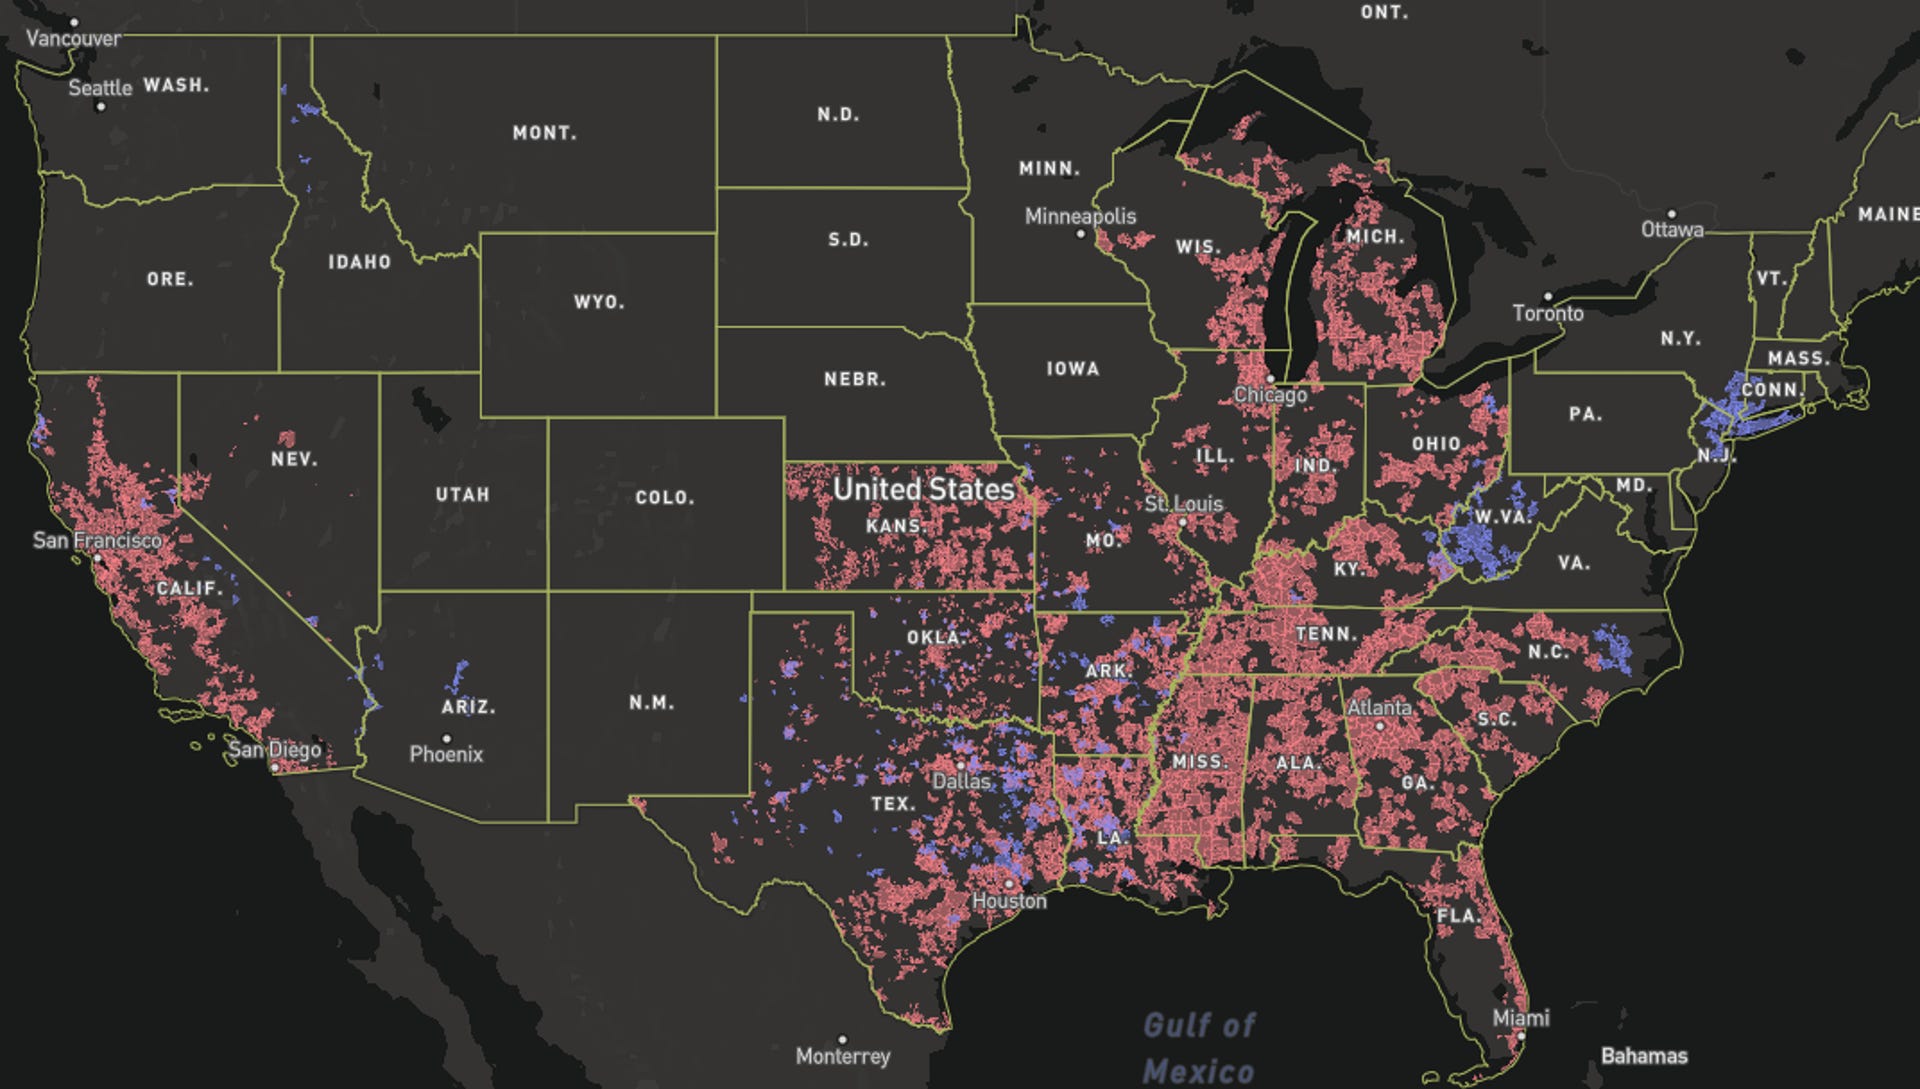 A coverage map comparing AT&T and Optimum